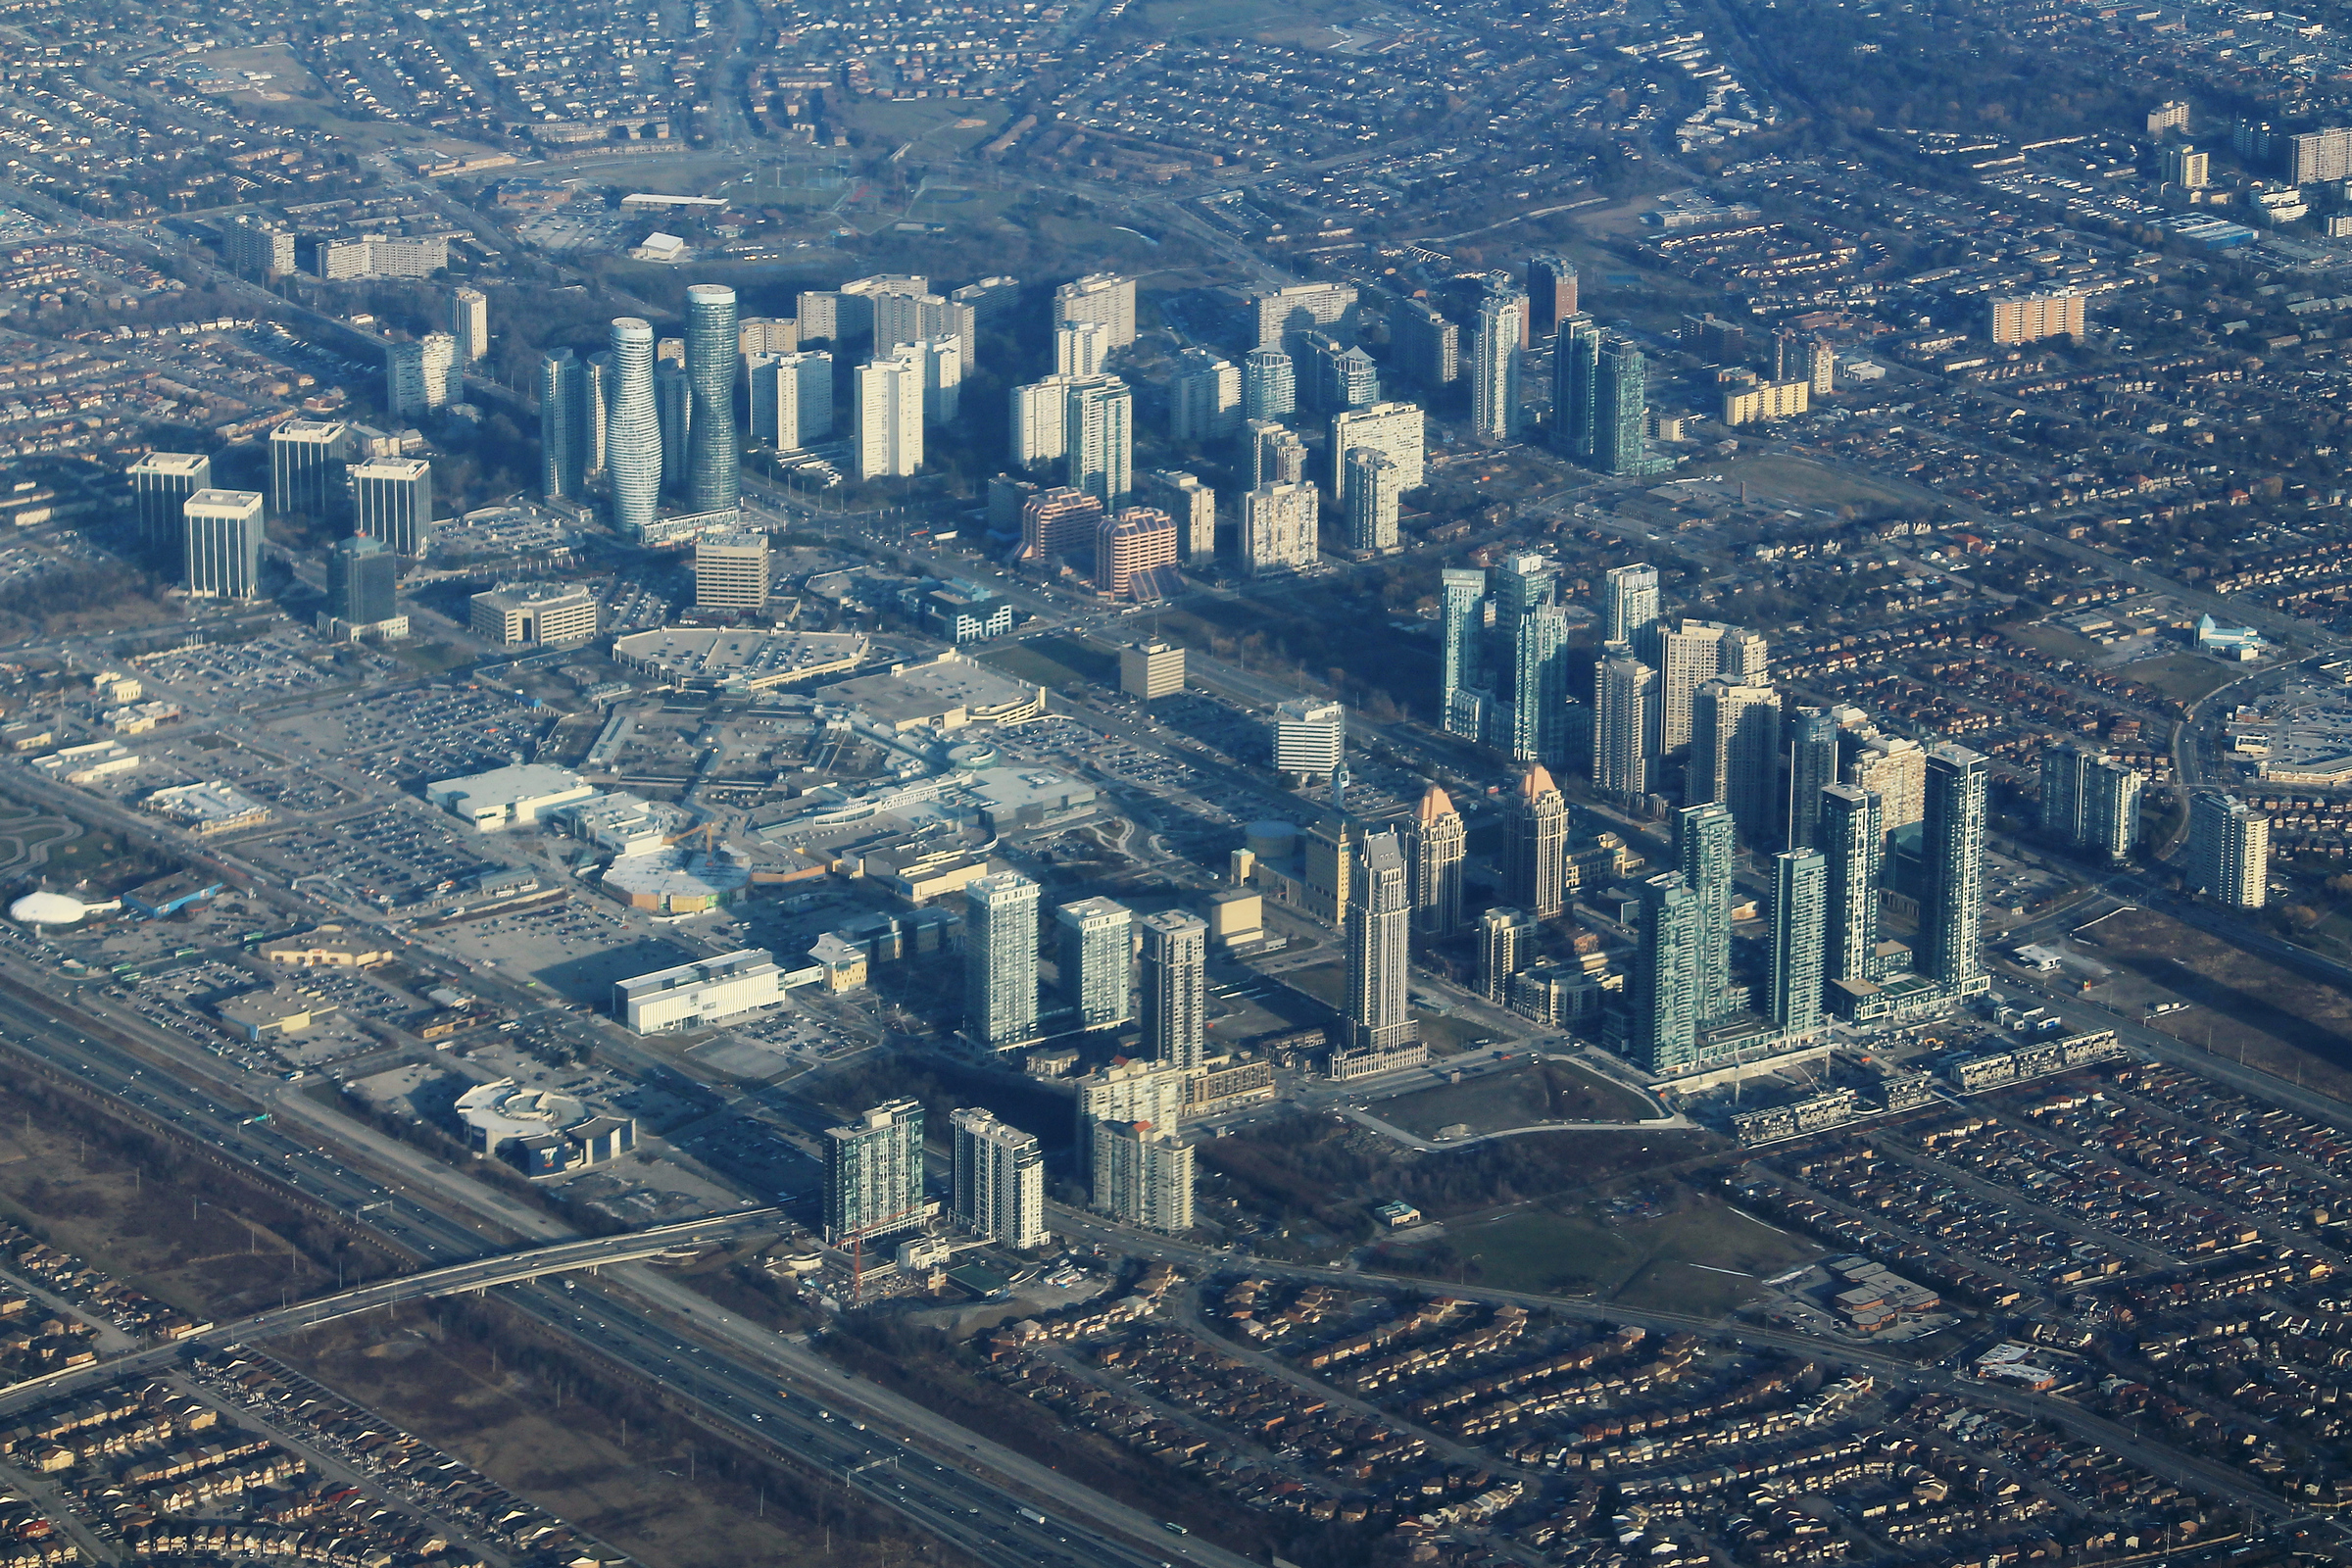 An aerial view of Mississauga's city centre, sleek high rises and the Square One mall, surrounded by sprawling suburban neighbourhoods.